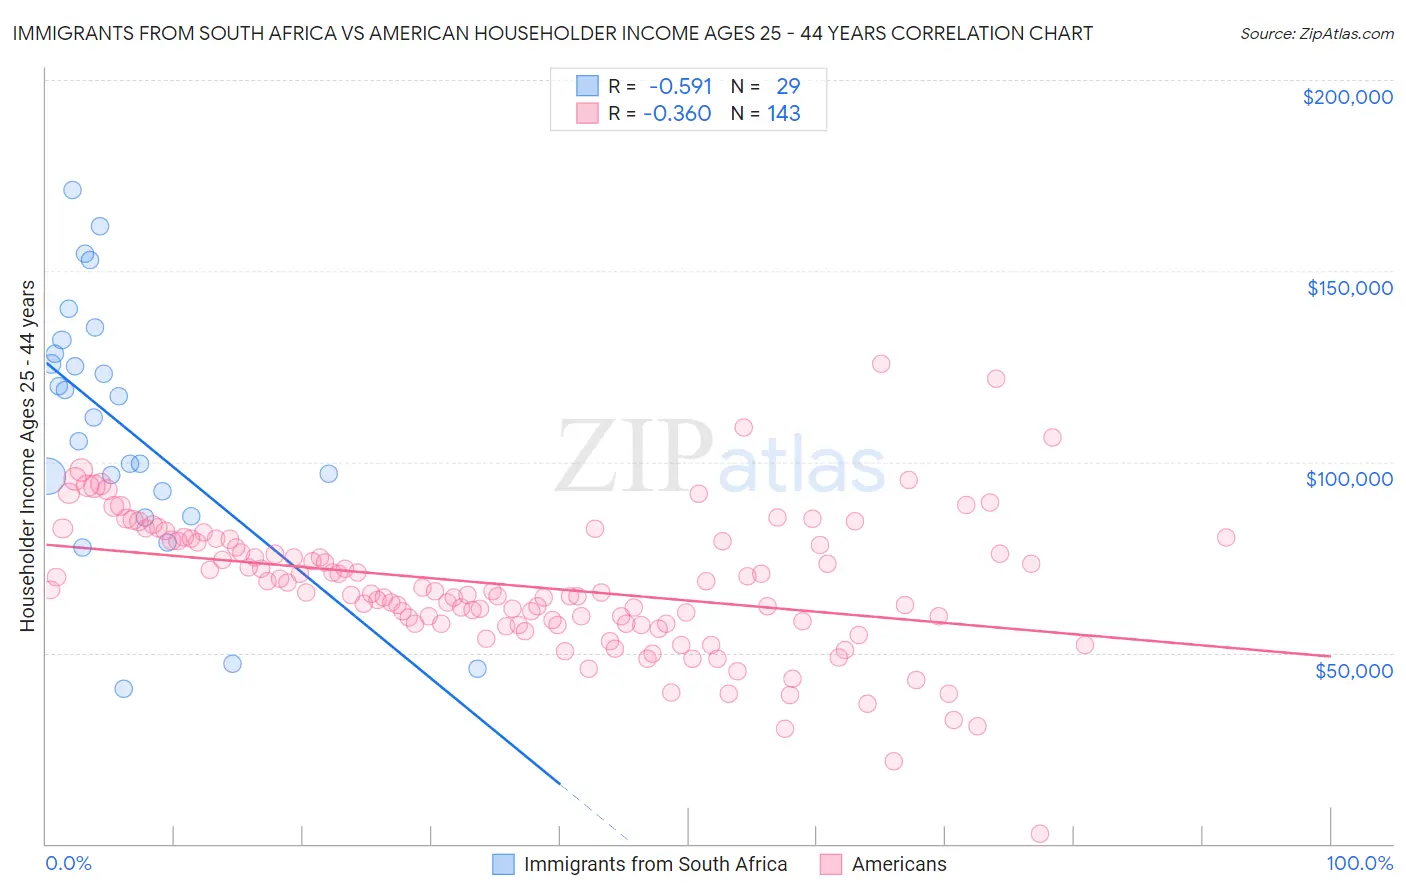 Immigrants from South Africa vs American Householder Income Ages 25 - 44 years